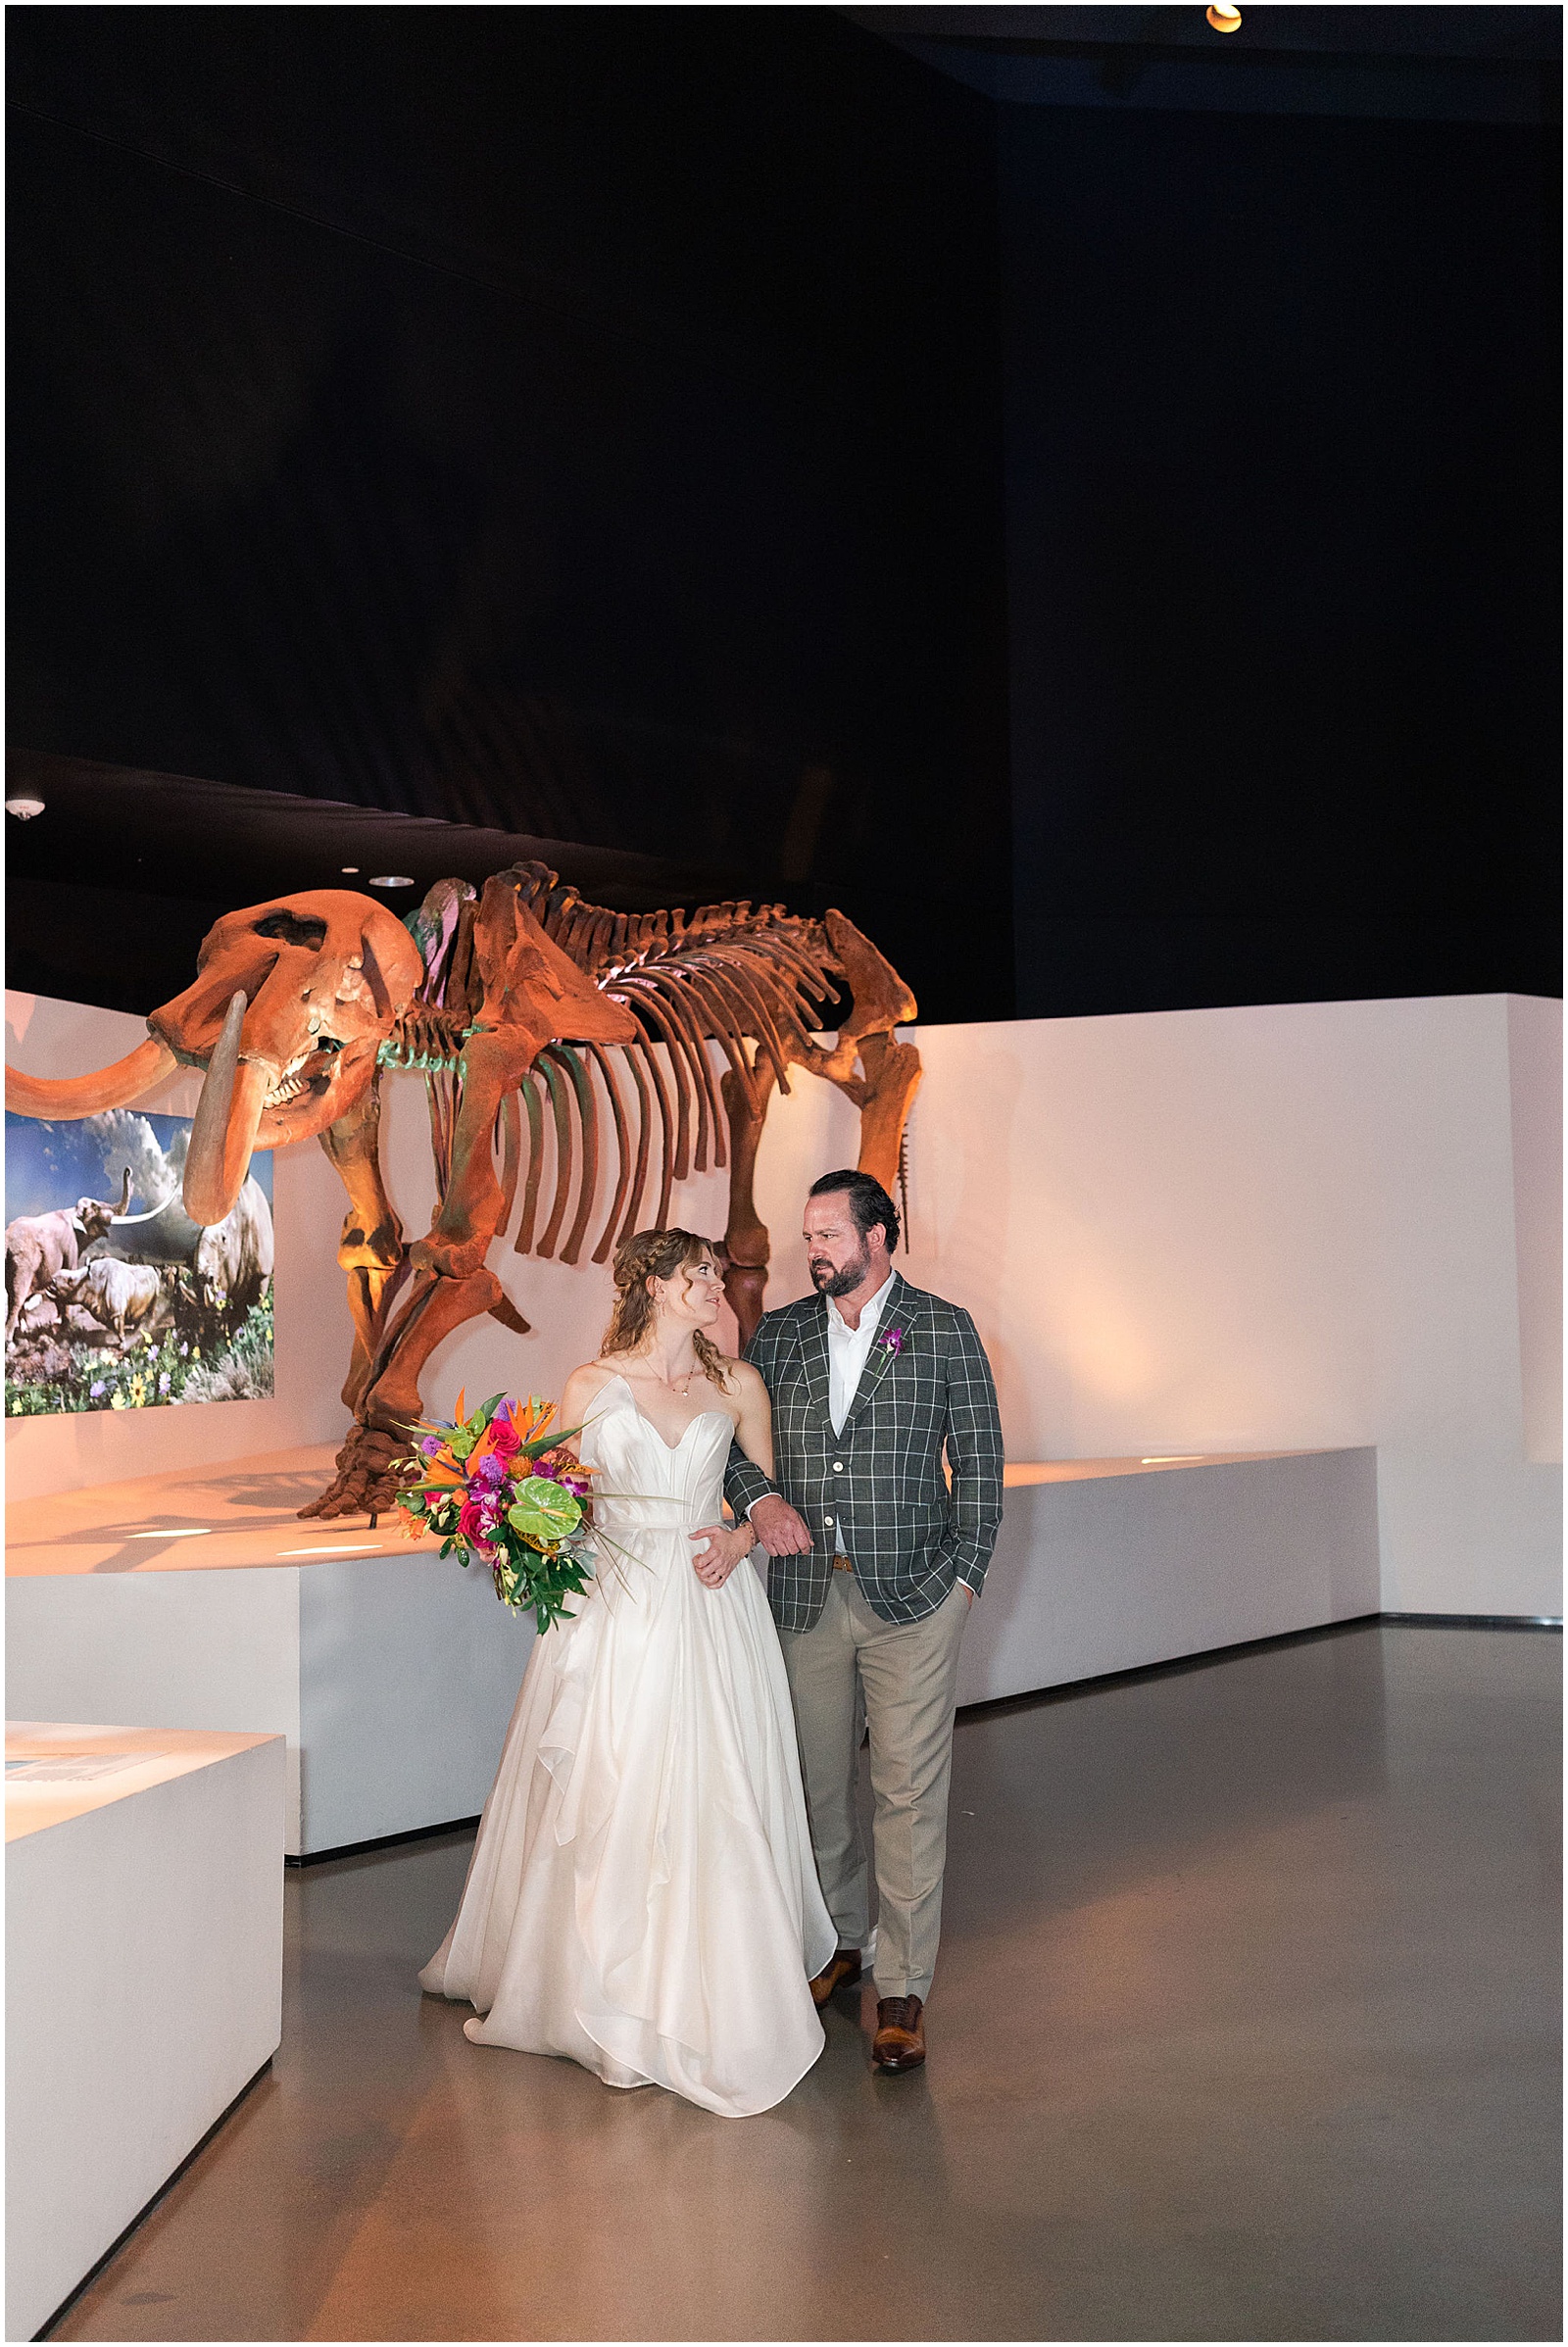 Bride and Groom portraits with Dinosaurs at The Houston Museum of Natural Science | Swish and Click Photography - Houston Wedding Photographer